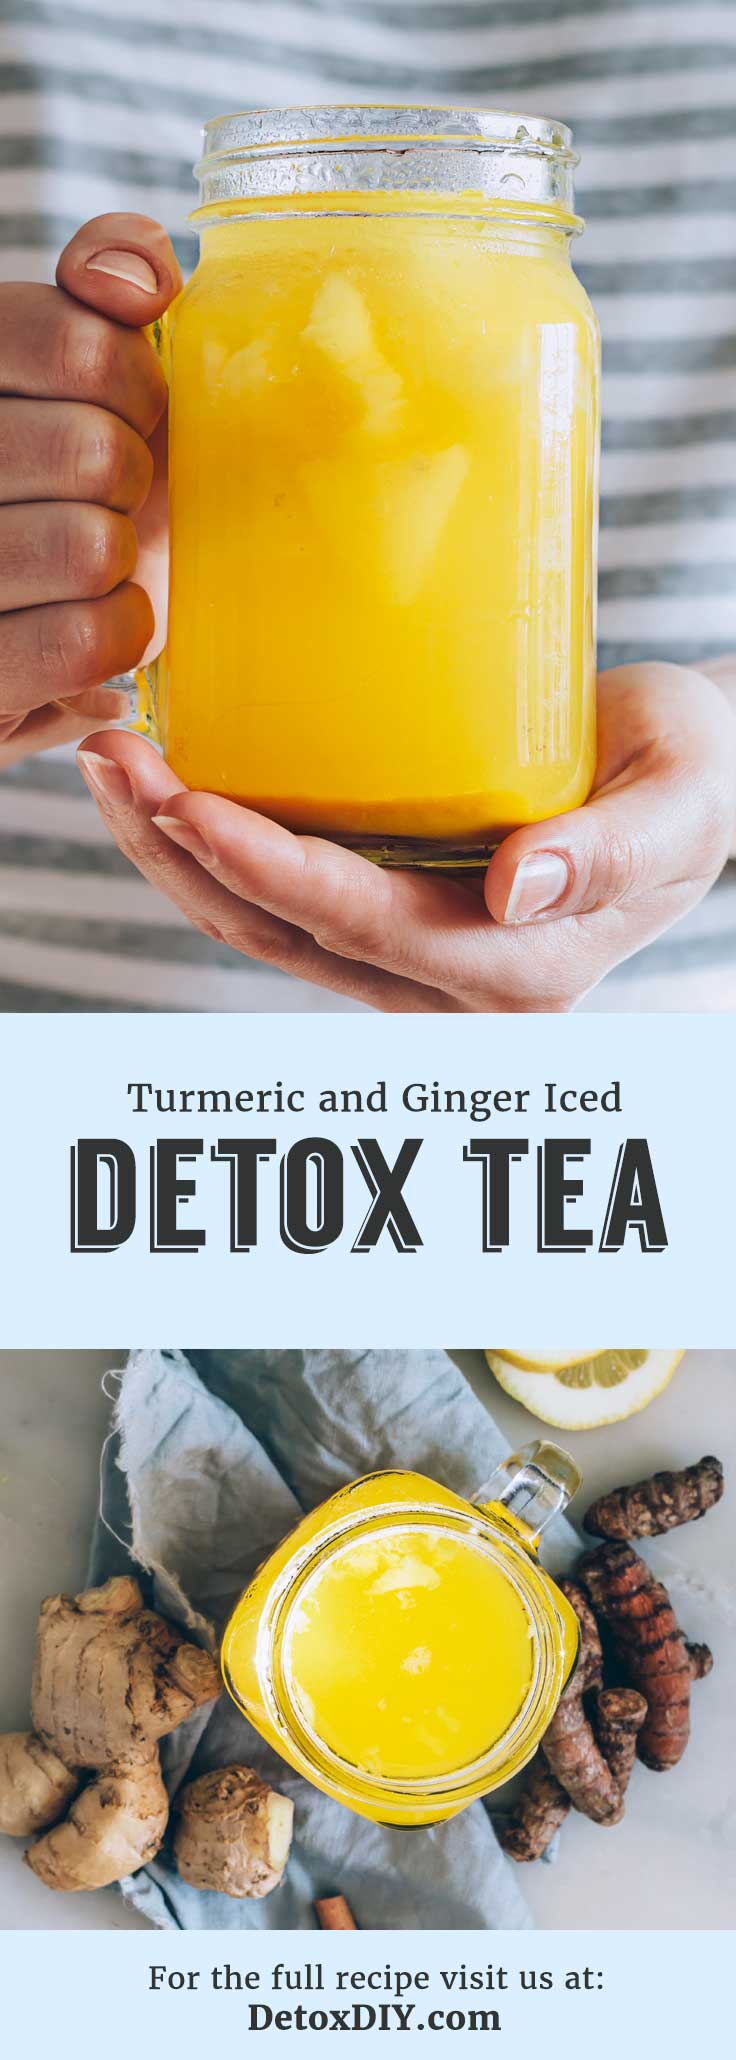 This iced turmeric and ginger detox tea is not only my favorite iced detox tea, but my favorite iced tea to drink in general! So refreshing and cleansing. Love this recipe.